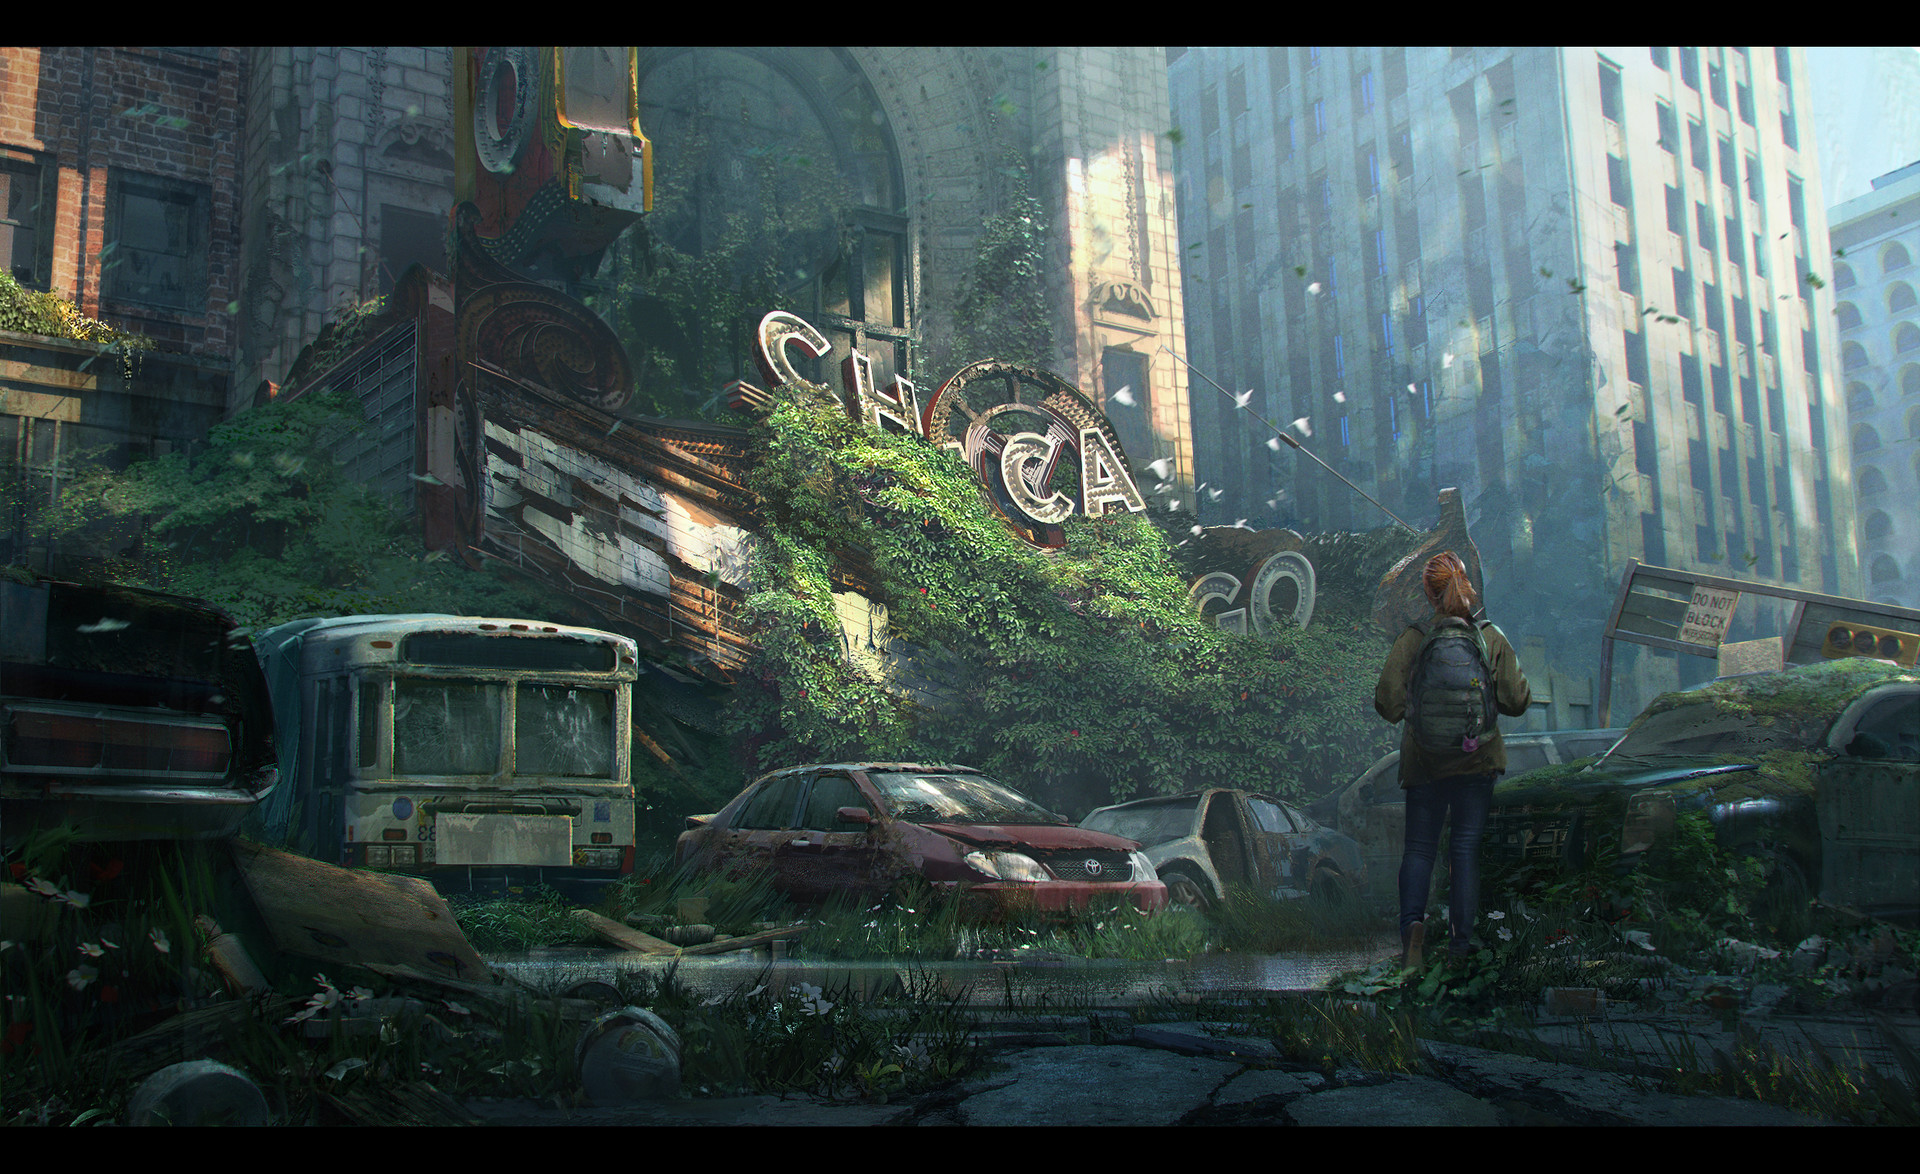 Artist Builds Stunning The Last of Us PC